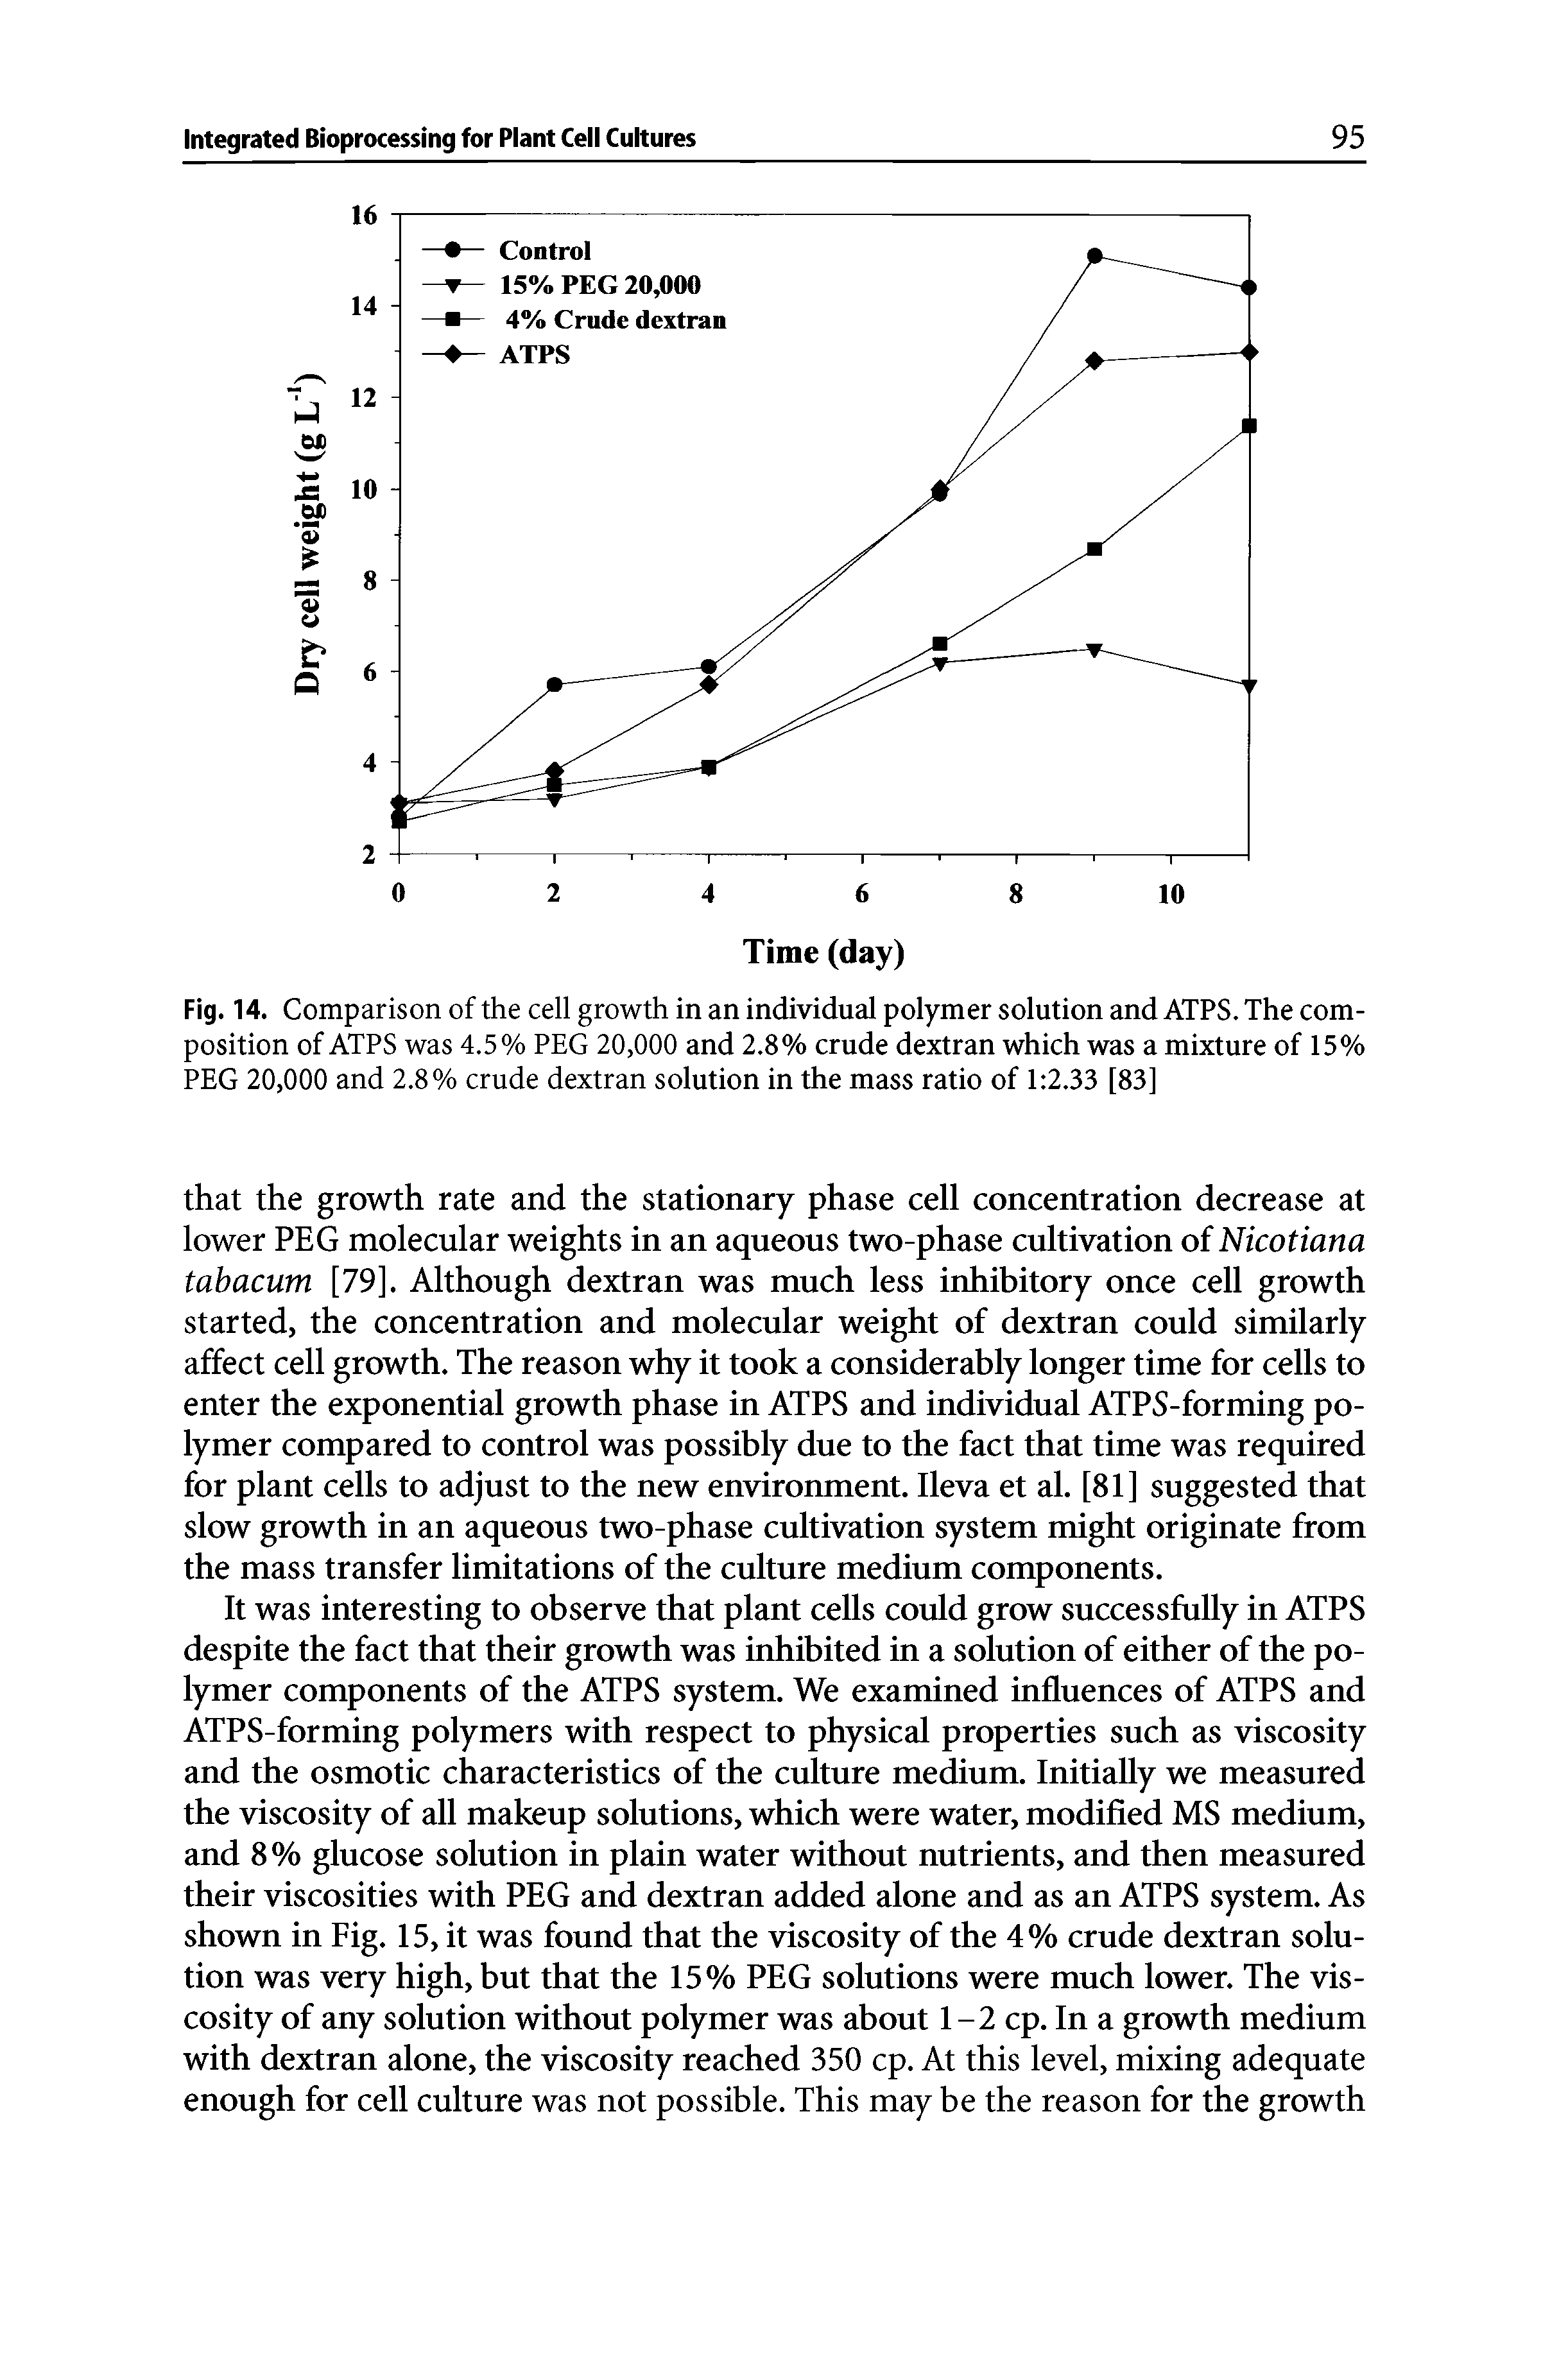 Fig. 14. Comparison of the cell growth in an individual polymer solution and ATPS. The composition of ATPS was 4.5% PEG 20,000 and 2.8% crude dextran which was a mixture of 15% PEG 20,000 and 2.8% crude dextran solution in the mass ratio of 1 2.33 [83]...